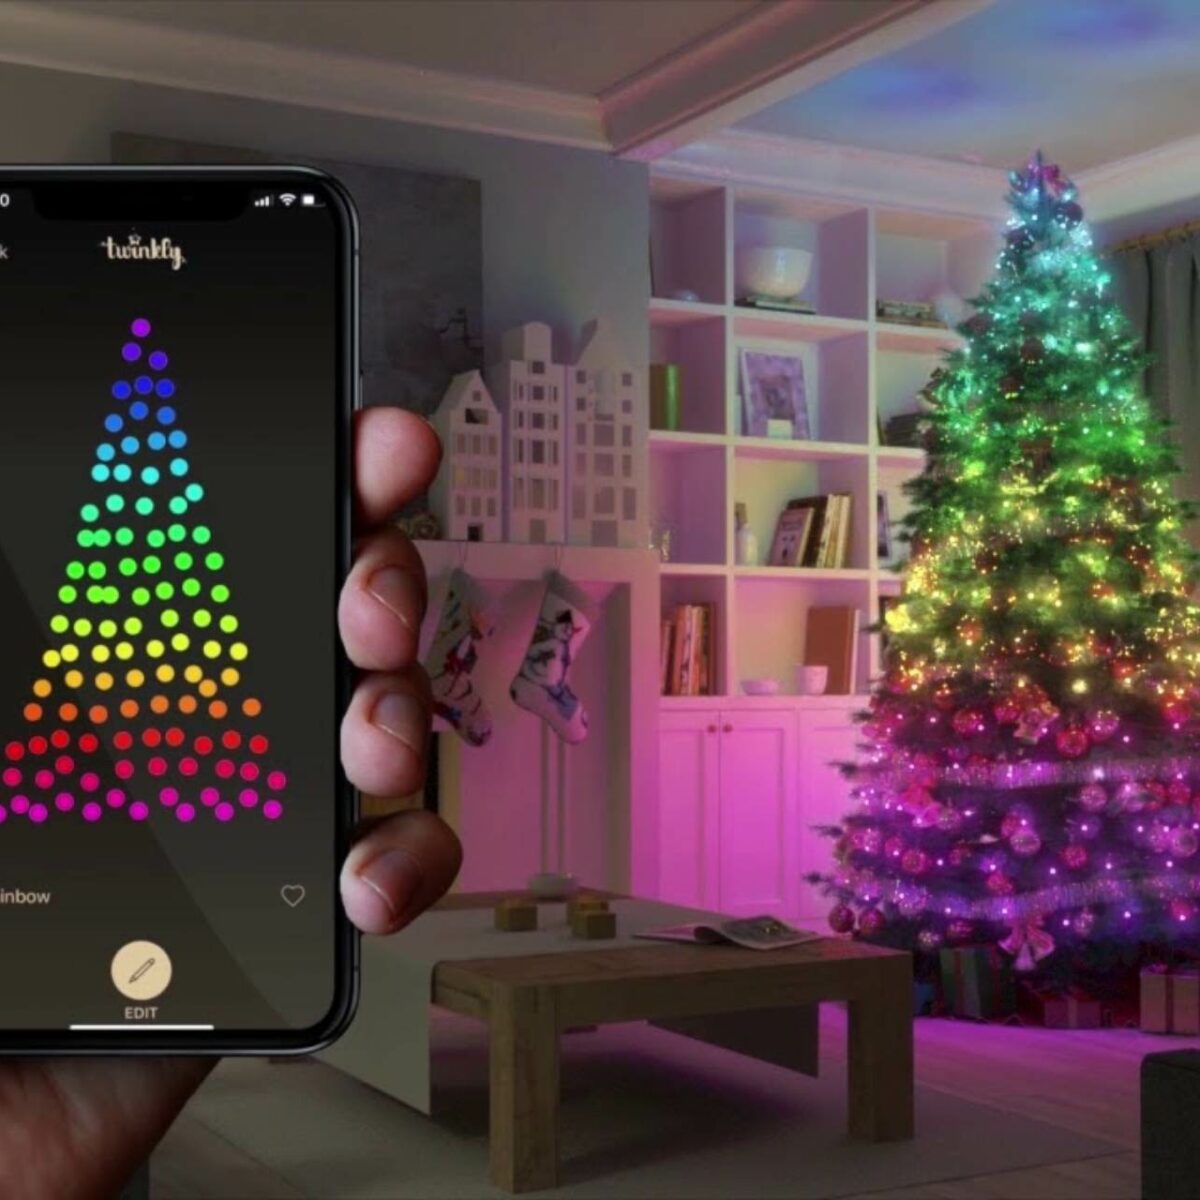 Details about   Christmas Tree USB LED string light Bluetooth App Control 